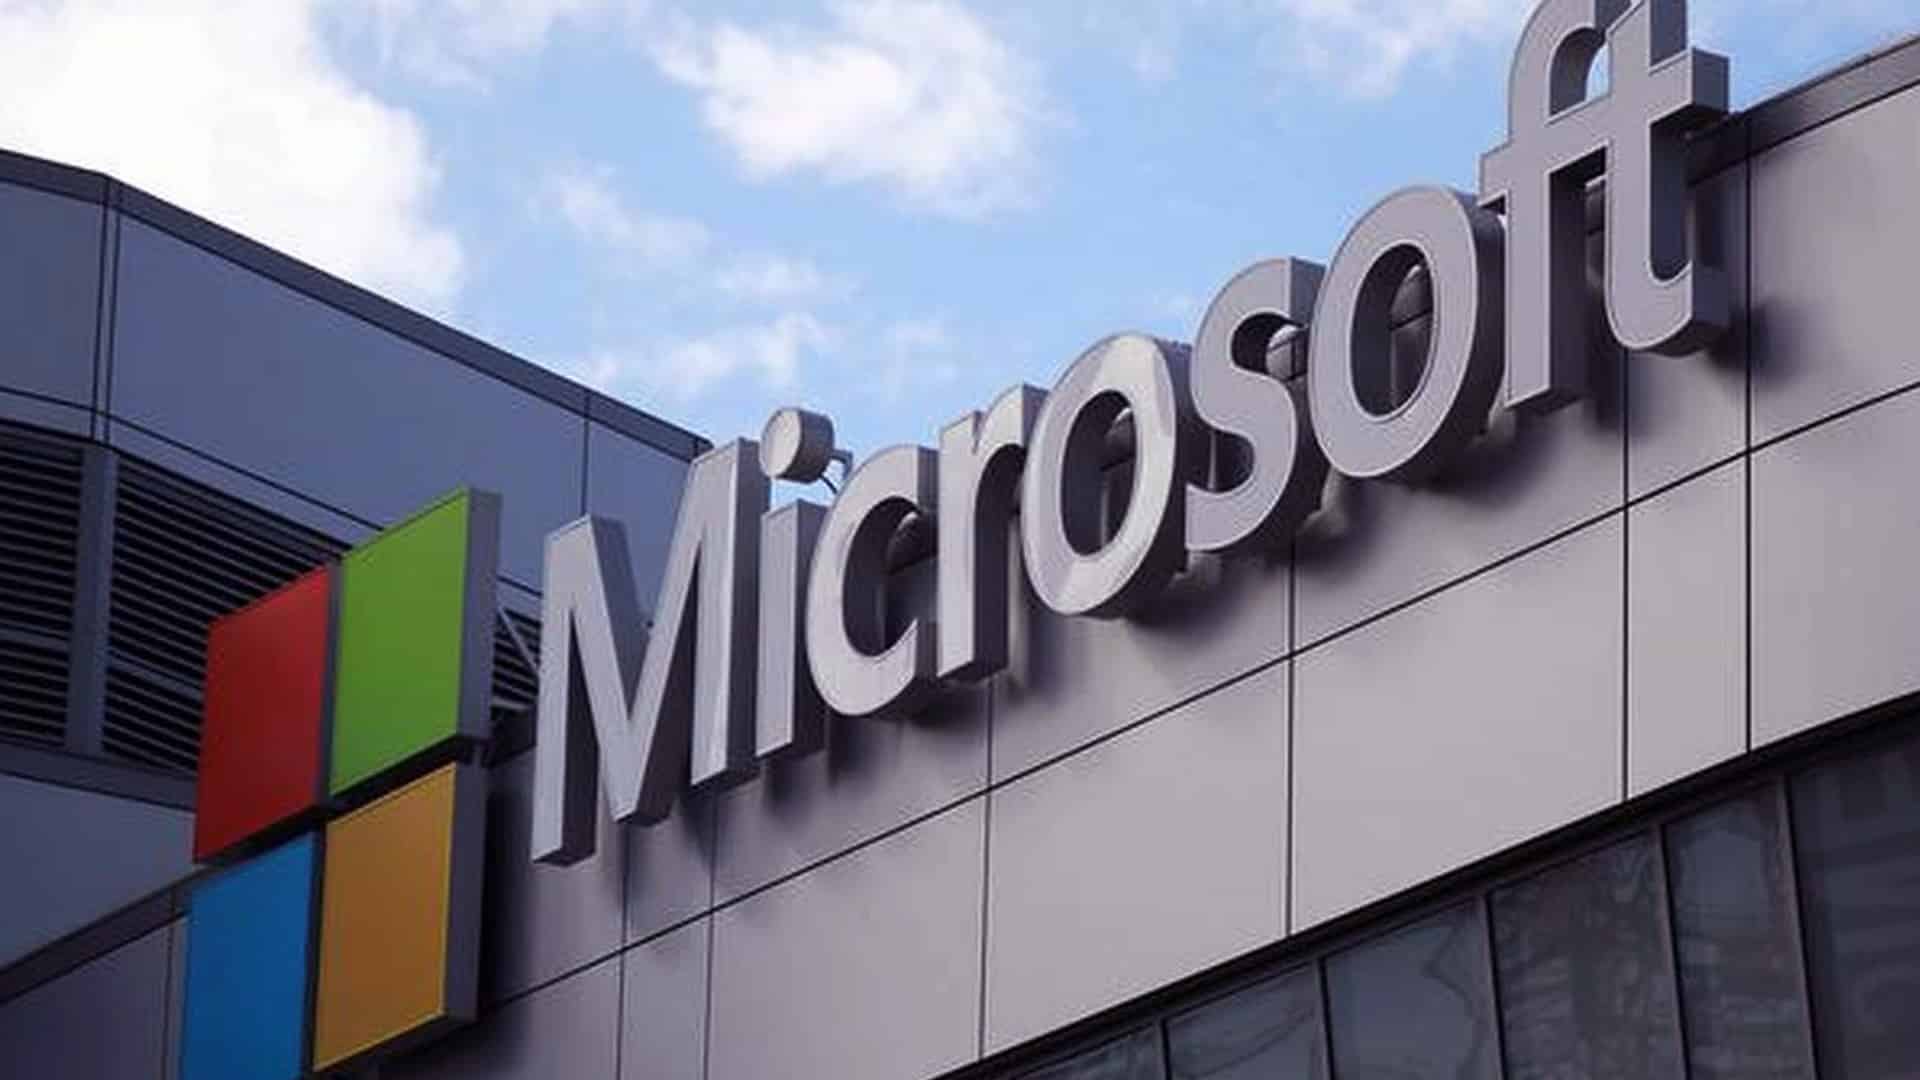 Microsoft launches cybersecurity skilling programme in India